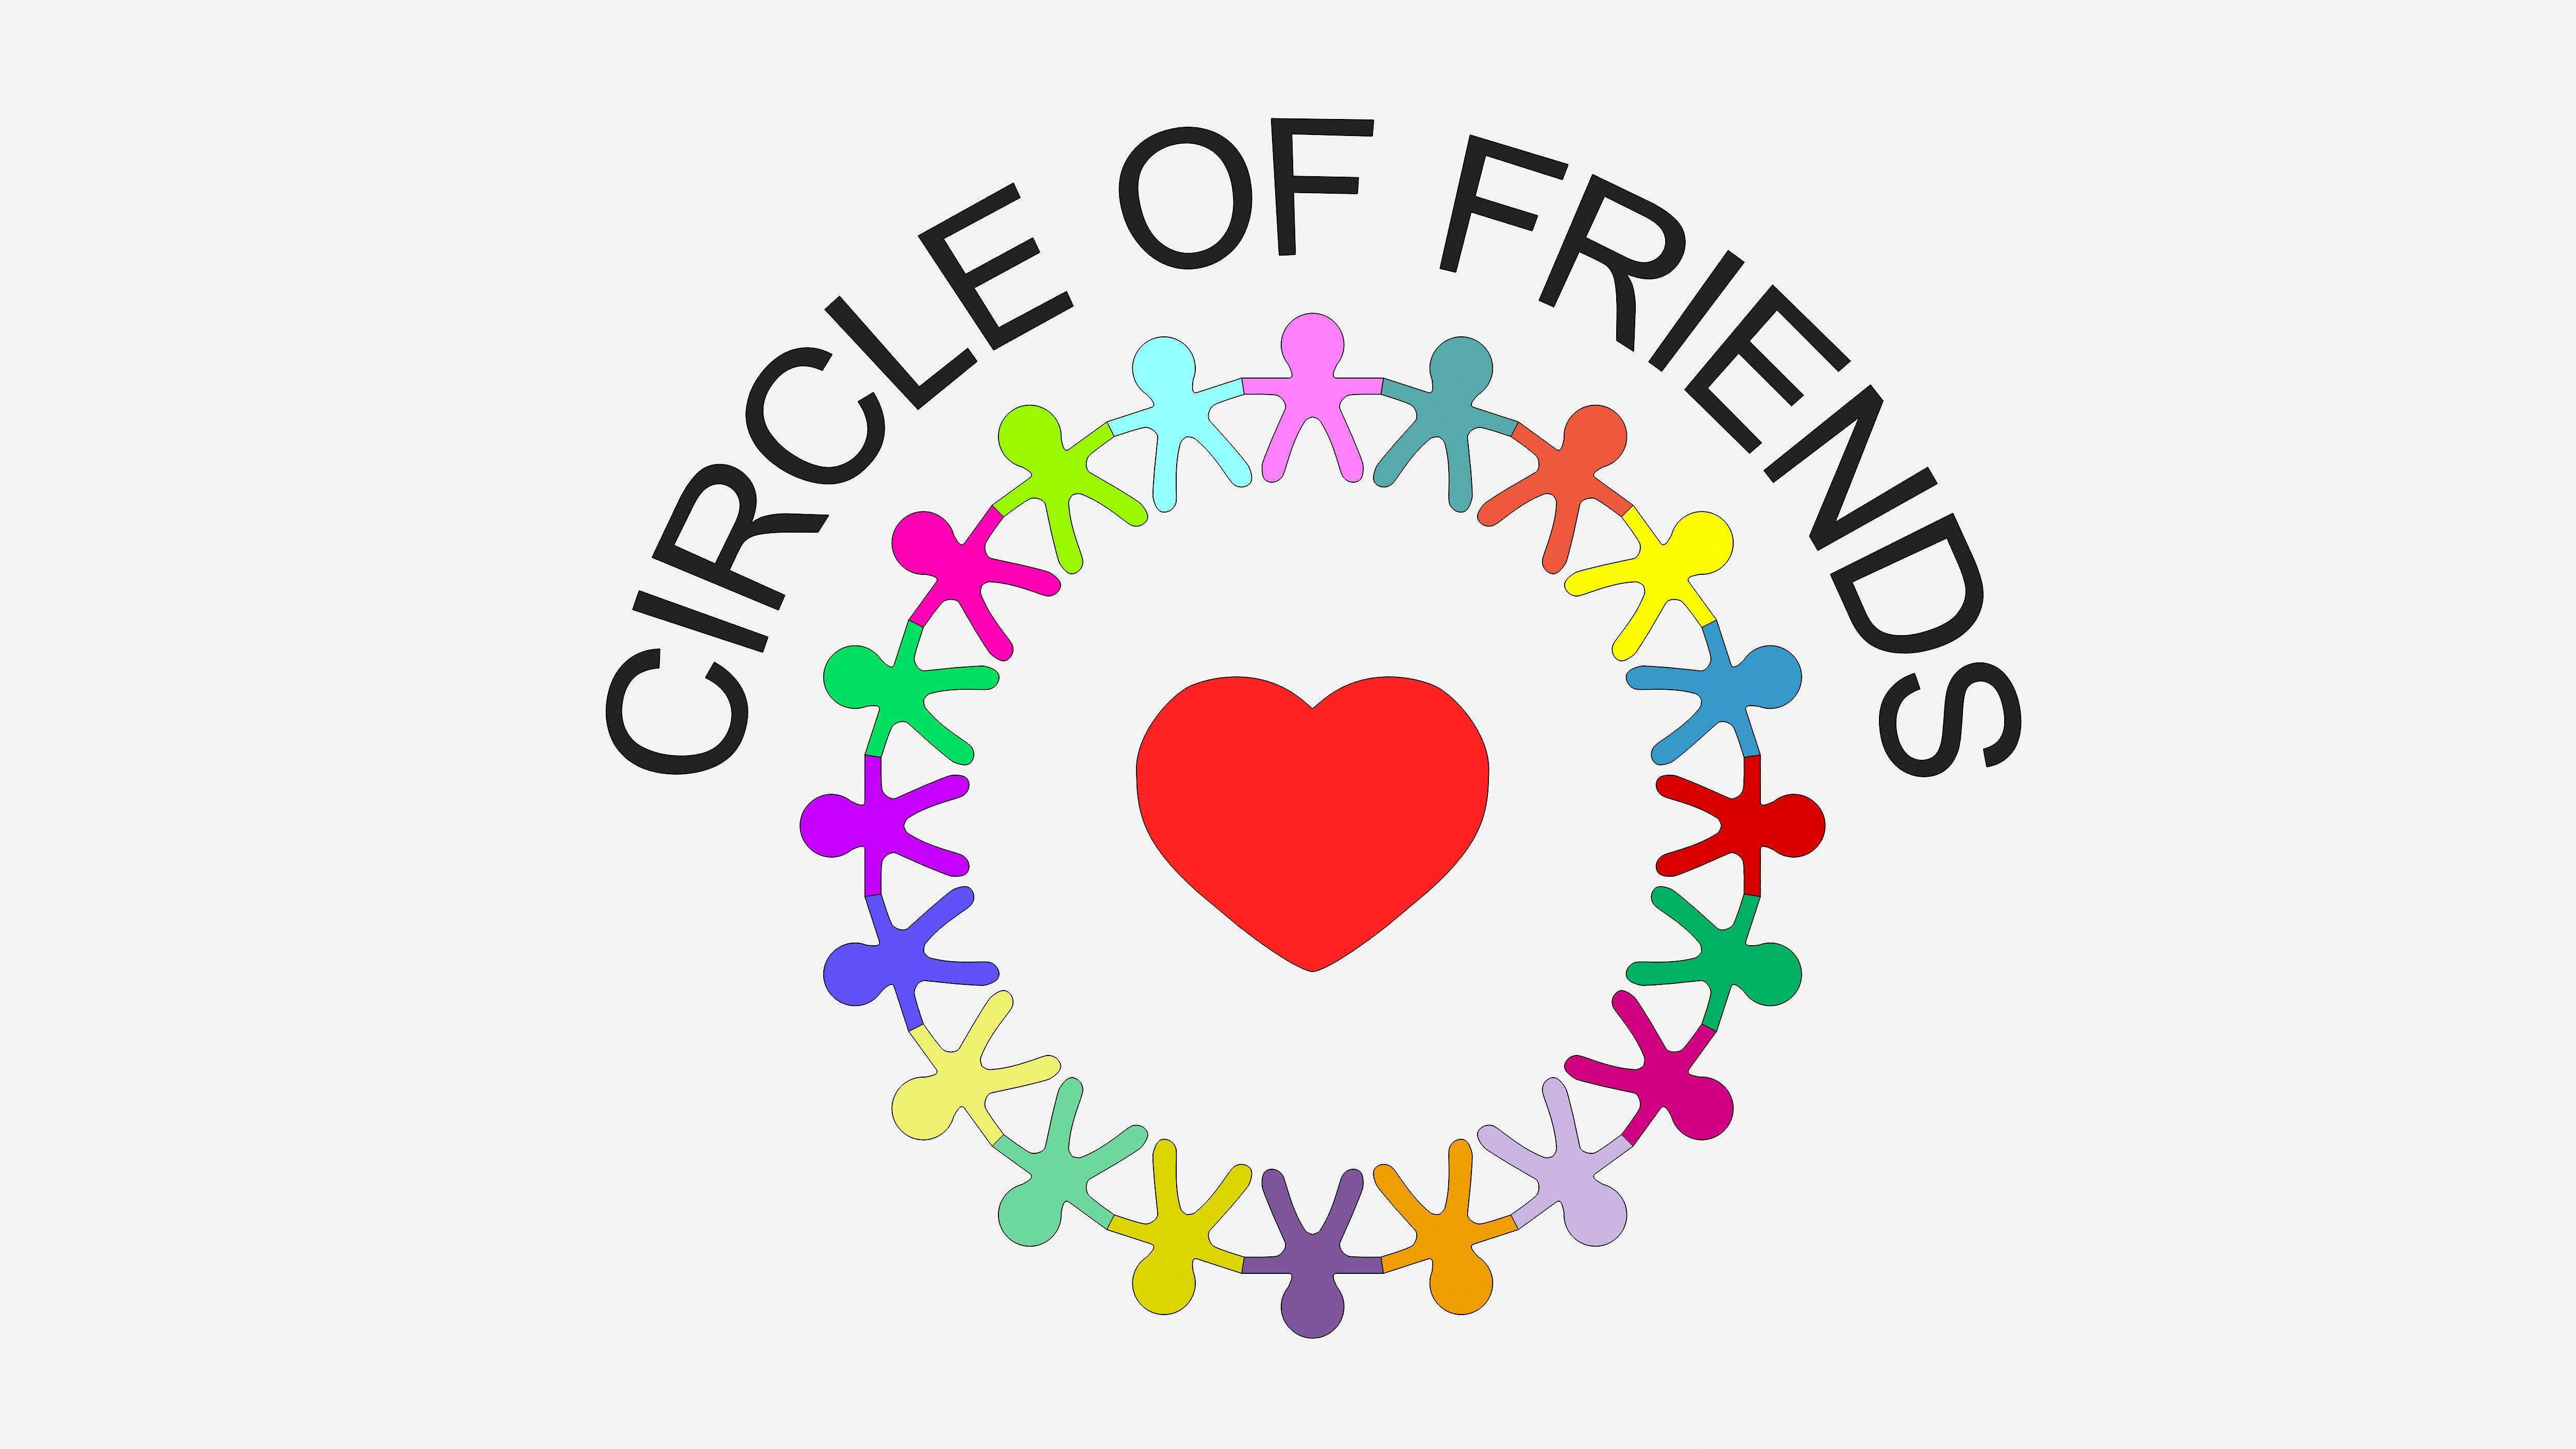 Circle of Friends Logo - Dynamic Future Together Community Interest Company of Friends